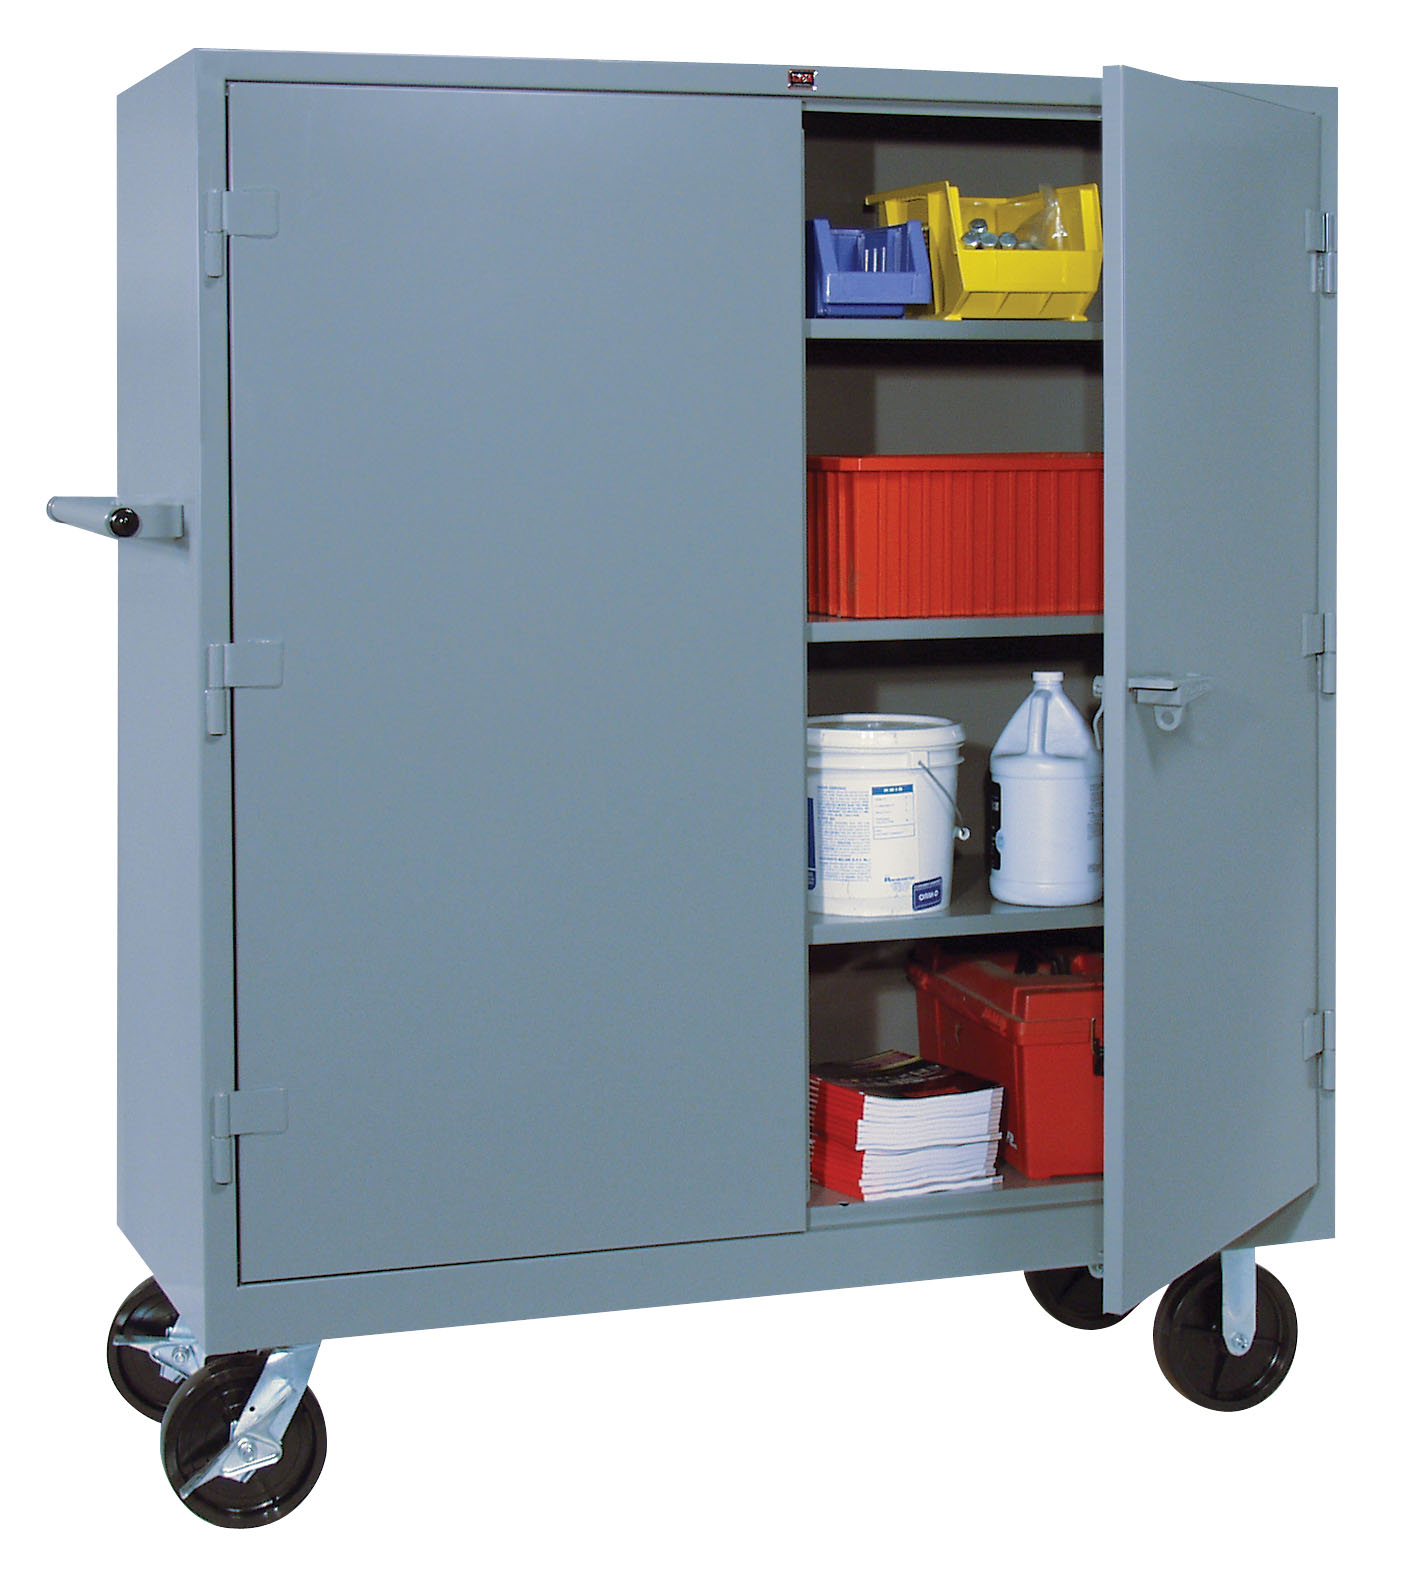 Strong Hold Industrial Cabinets from Essex Drum Handling  Strong Hold's  1,900 lbs Capacity Floor Model Industrial Storage Cabinets are built for  rough and tough industrial storage needs. Get Heavy Duty Metal